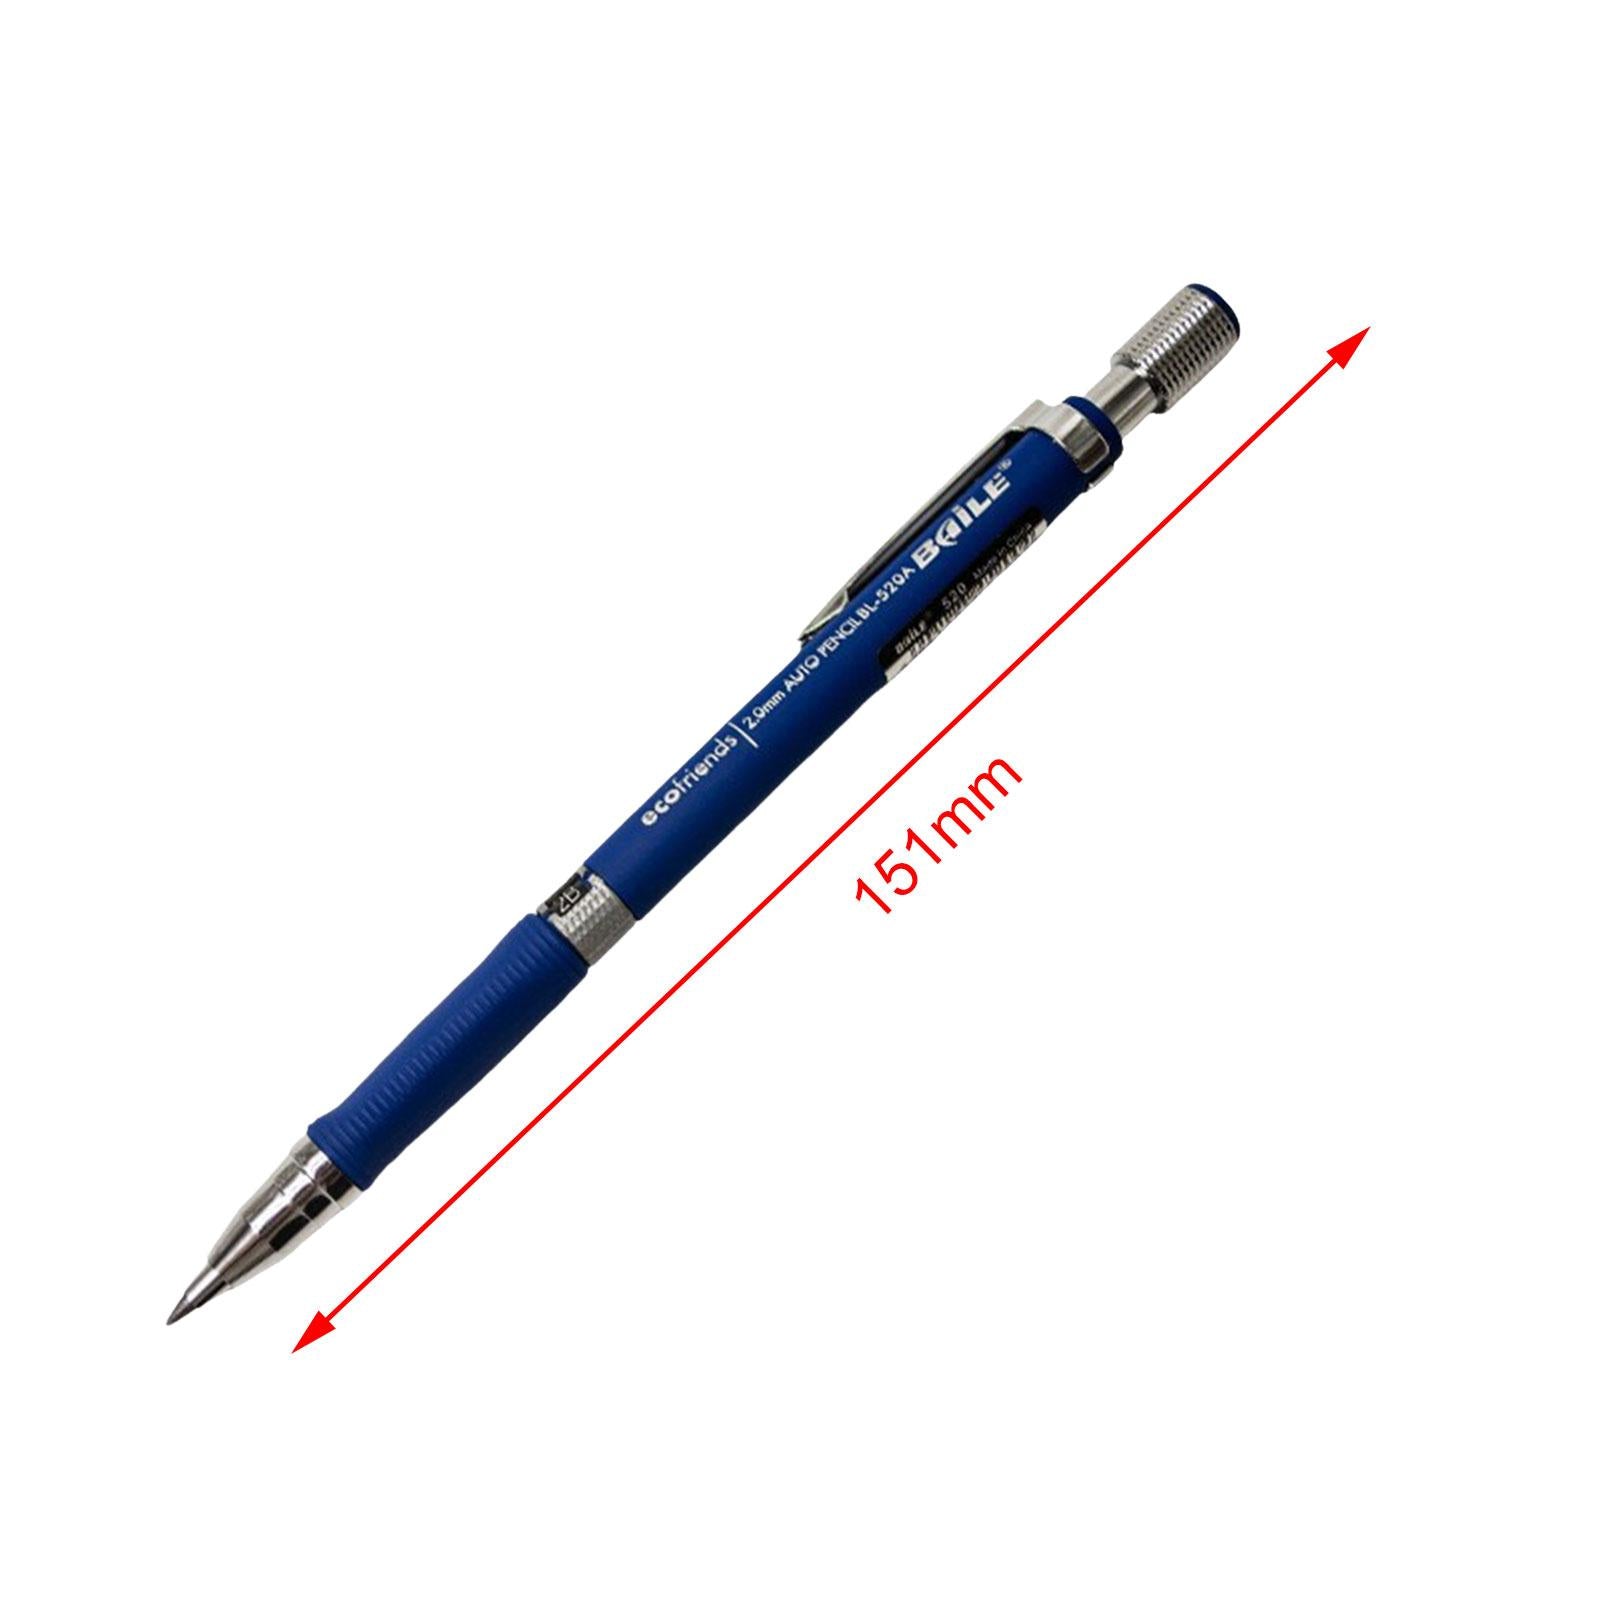 Art Painting Pencils Portable Drafting Pencil for Drafting Writing Sketching Blue